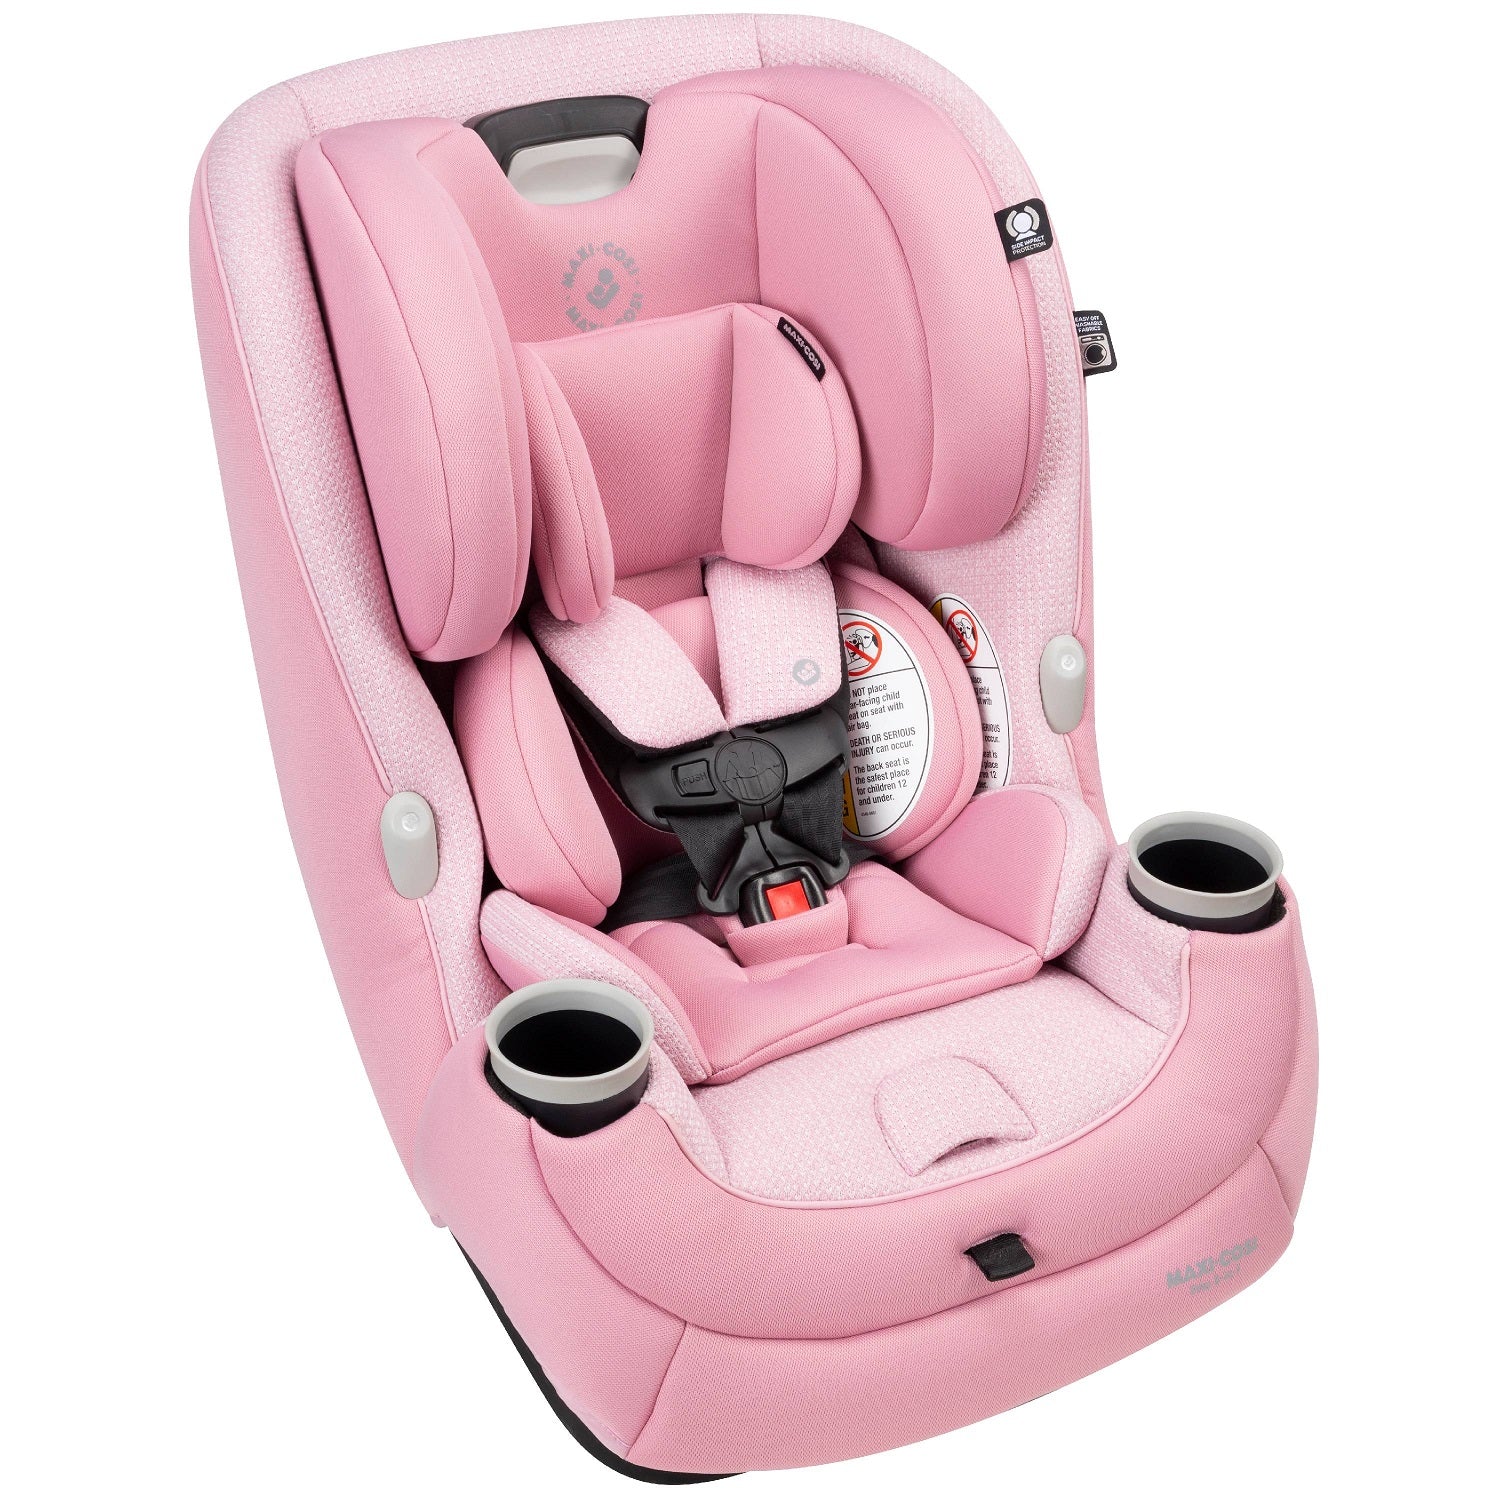 Maxi Cosi Car Seat Stages | tca.dothome.co.kr